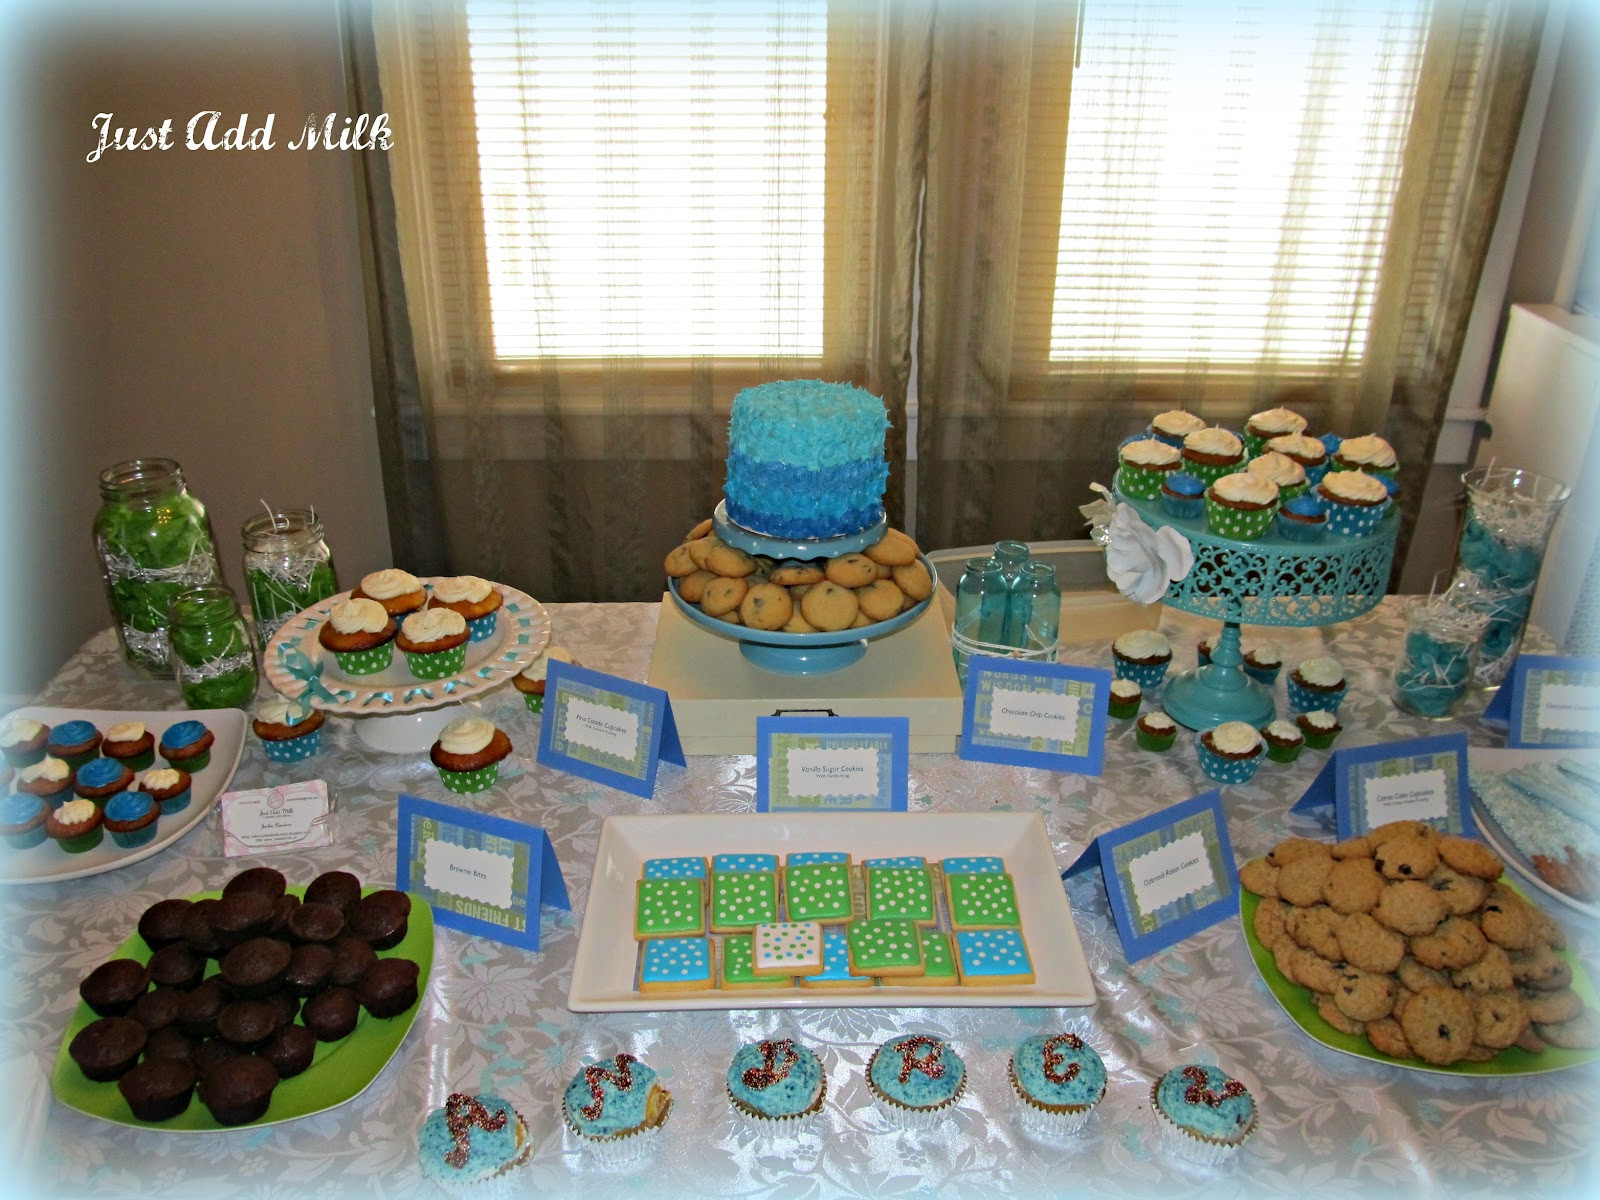 Baby Shower Dessert Table
 Just Add Milk Baby Shower Desserts and Table